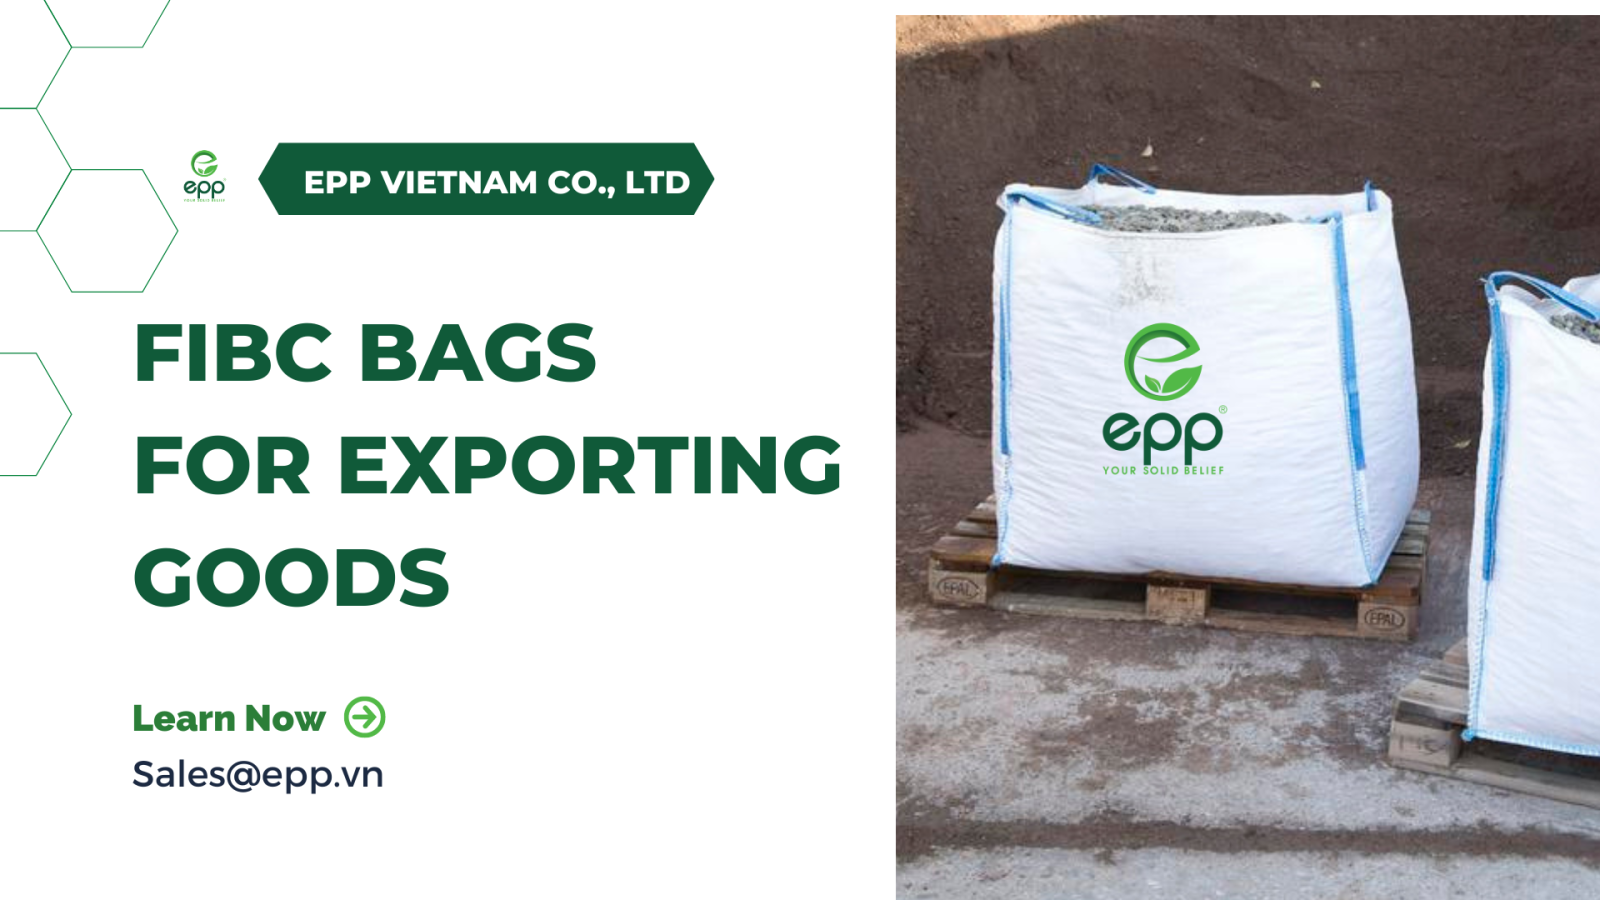 Fibc-bags-for-exporting-goods.png